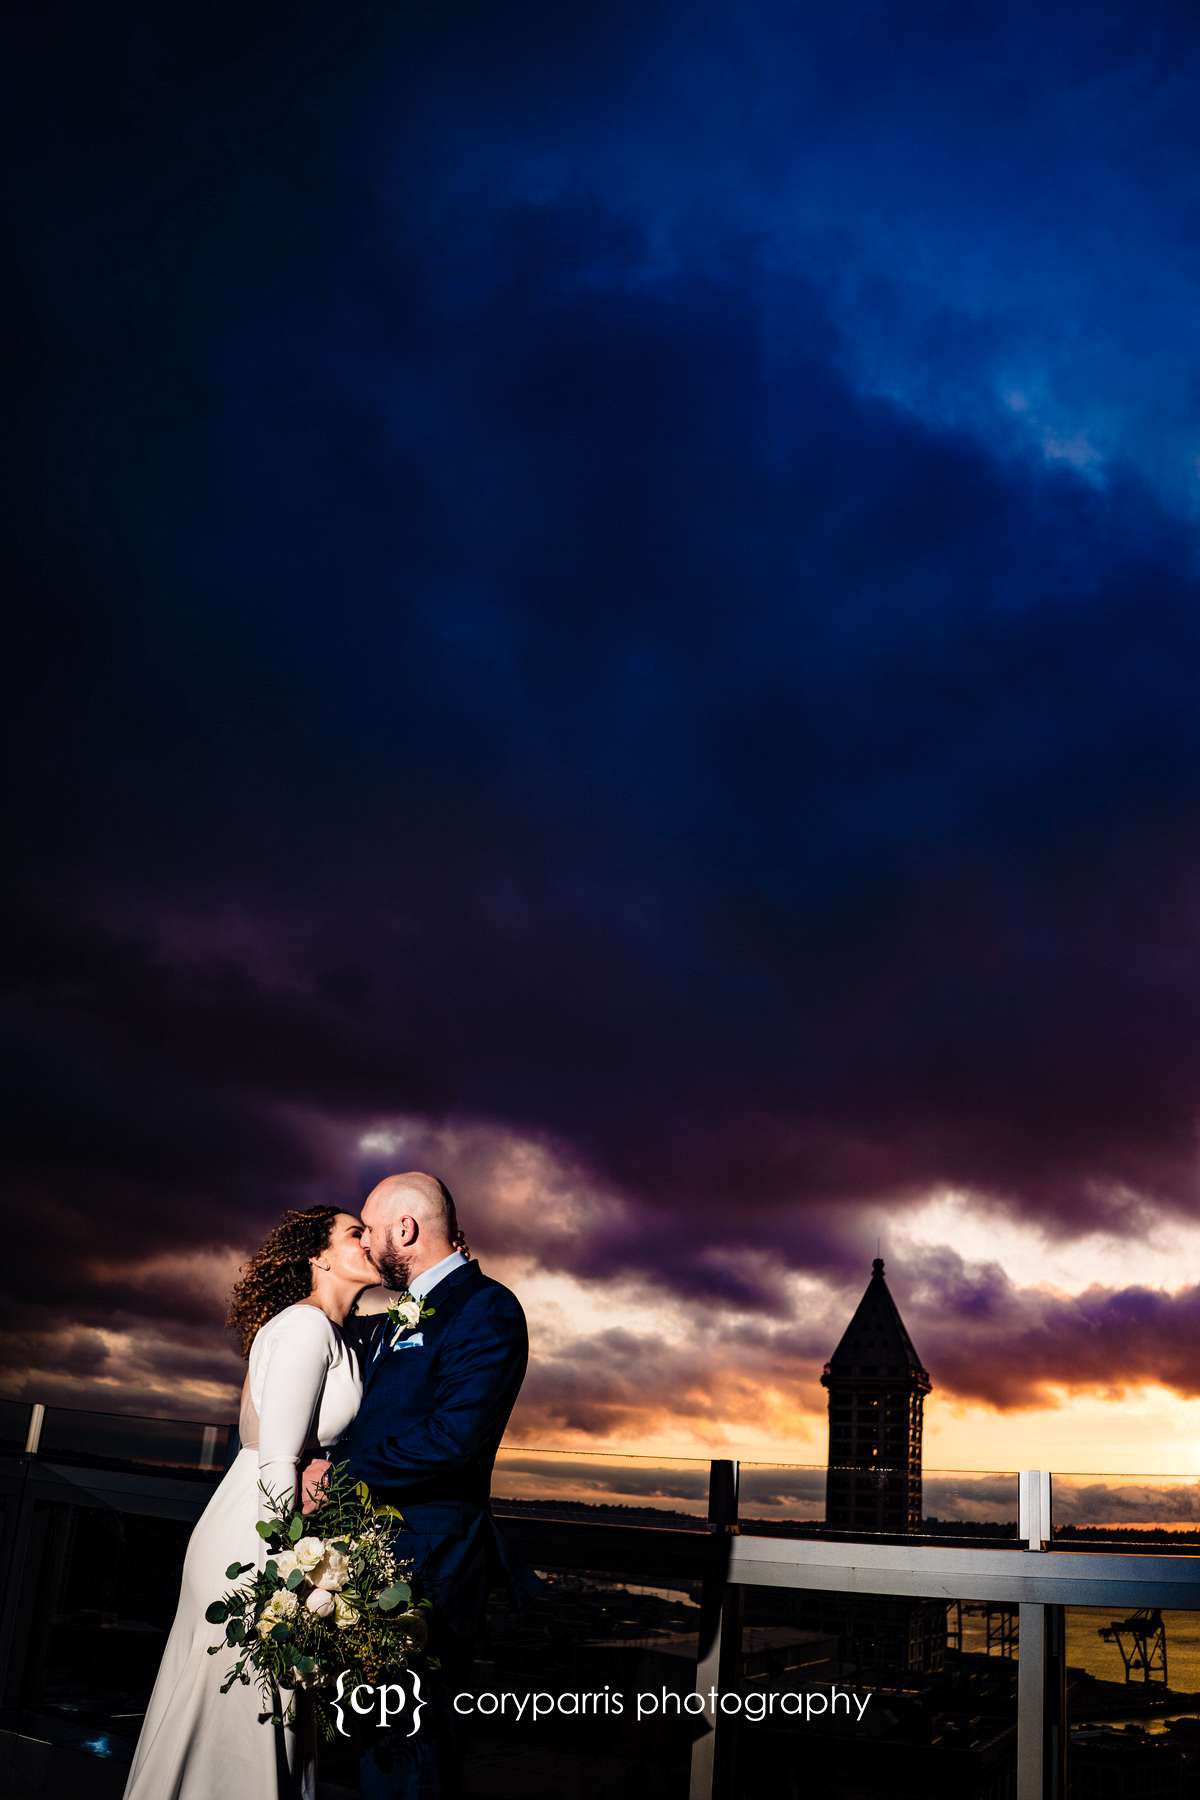  I had a great time playing with the sunset and views from the top of the courthouse before the elopement wedding ceremony 